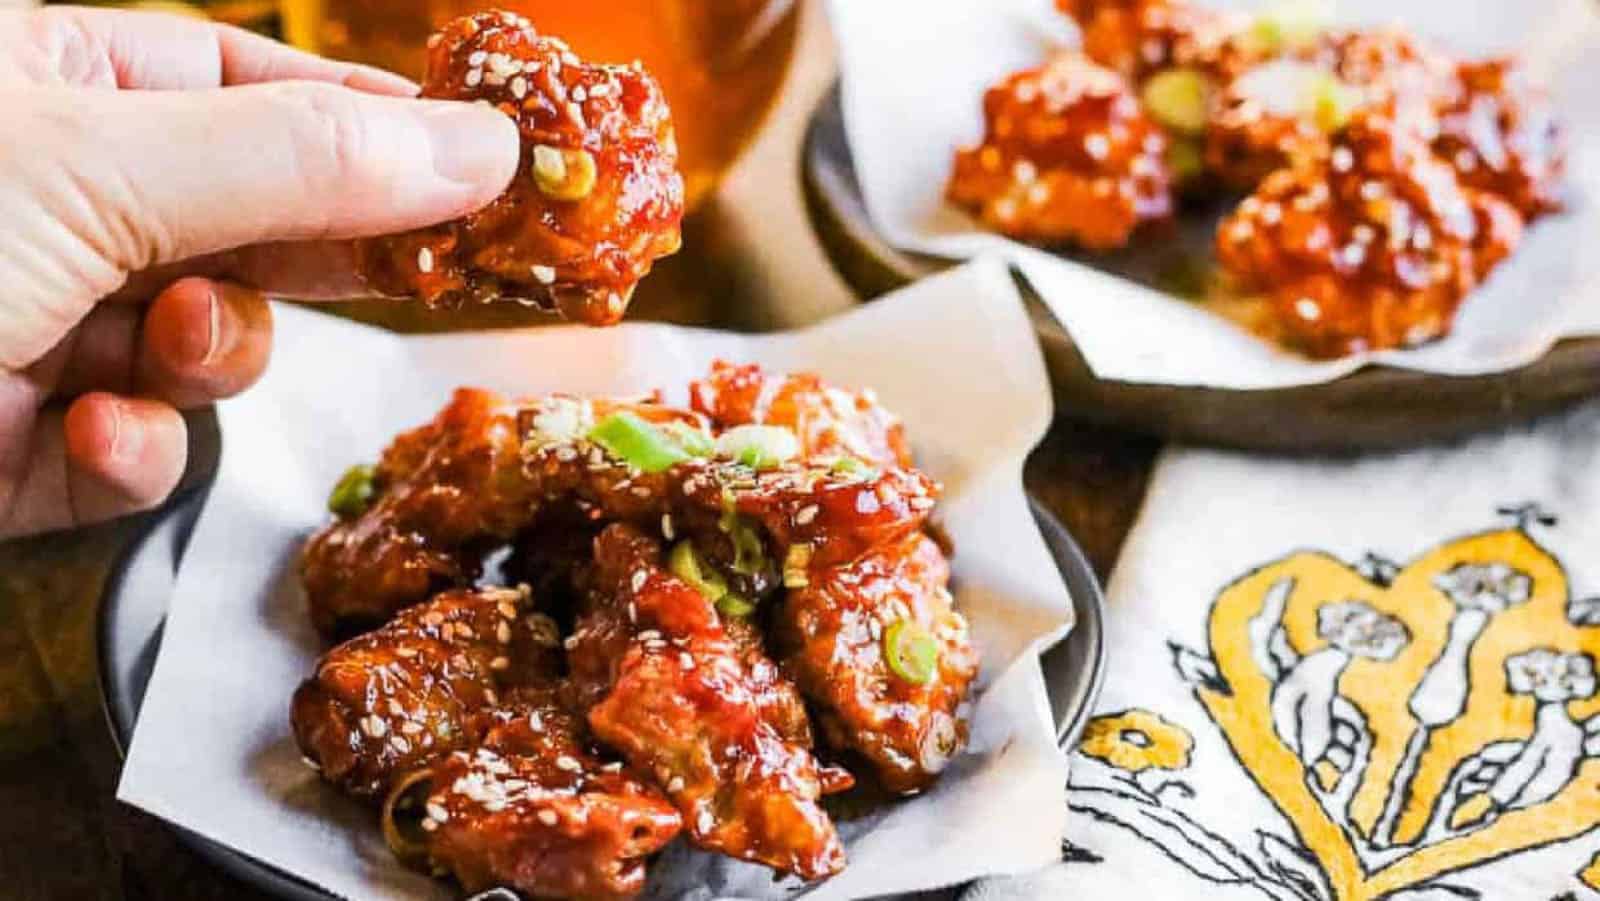 <p>Want to try something new? How about Korean Fried Chicken? It’s an amazing sweet and spicy flavor experience that cooks up perfectly in the air fryer. Get ready for a burst of flavor that you won’t soon forget!<br><strong>Get the Recipe: </strong><a href="https://allwaysdelicious.com/air-fryer-korean-fried-chicken/?utm_source=msn&utm_medium=page&utm_campaign=msn">Air Fryer Korean Fried Chicken</a></p>